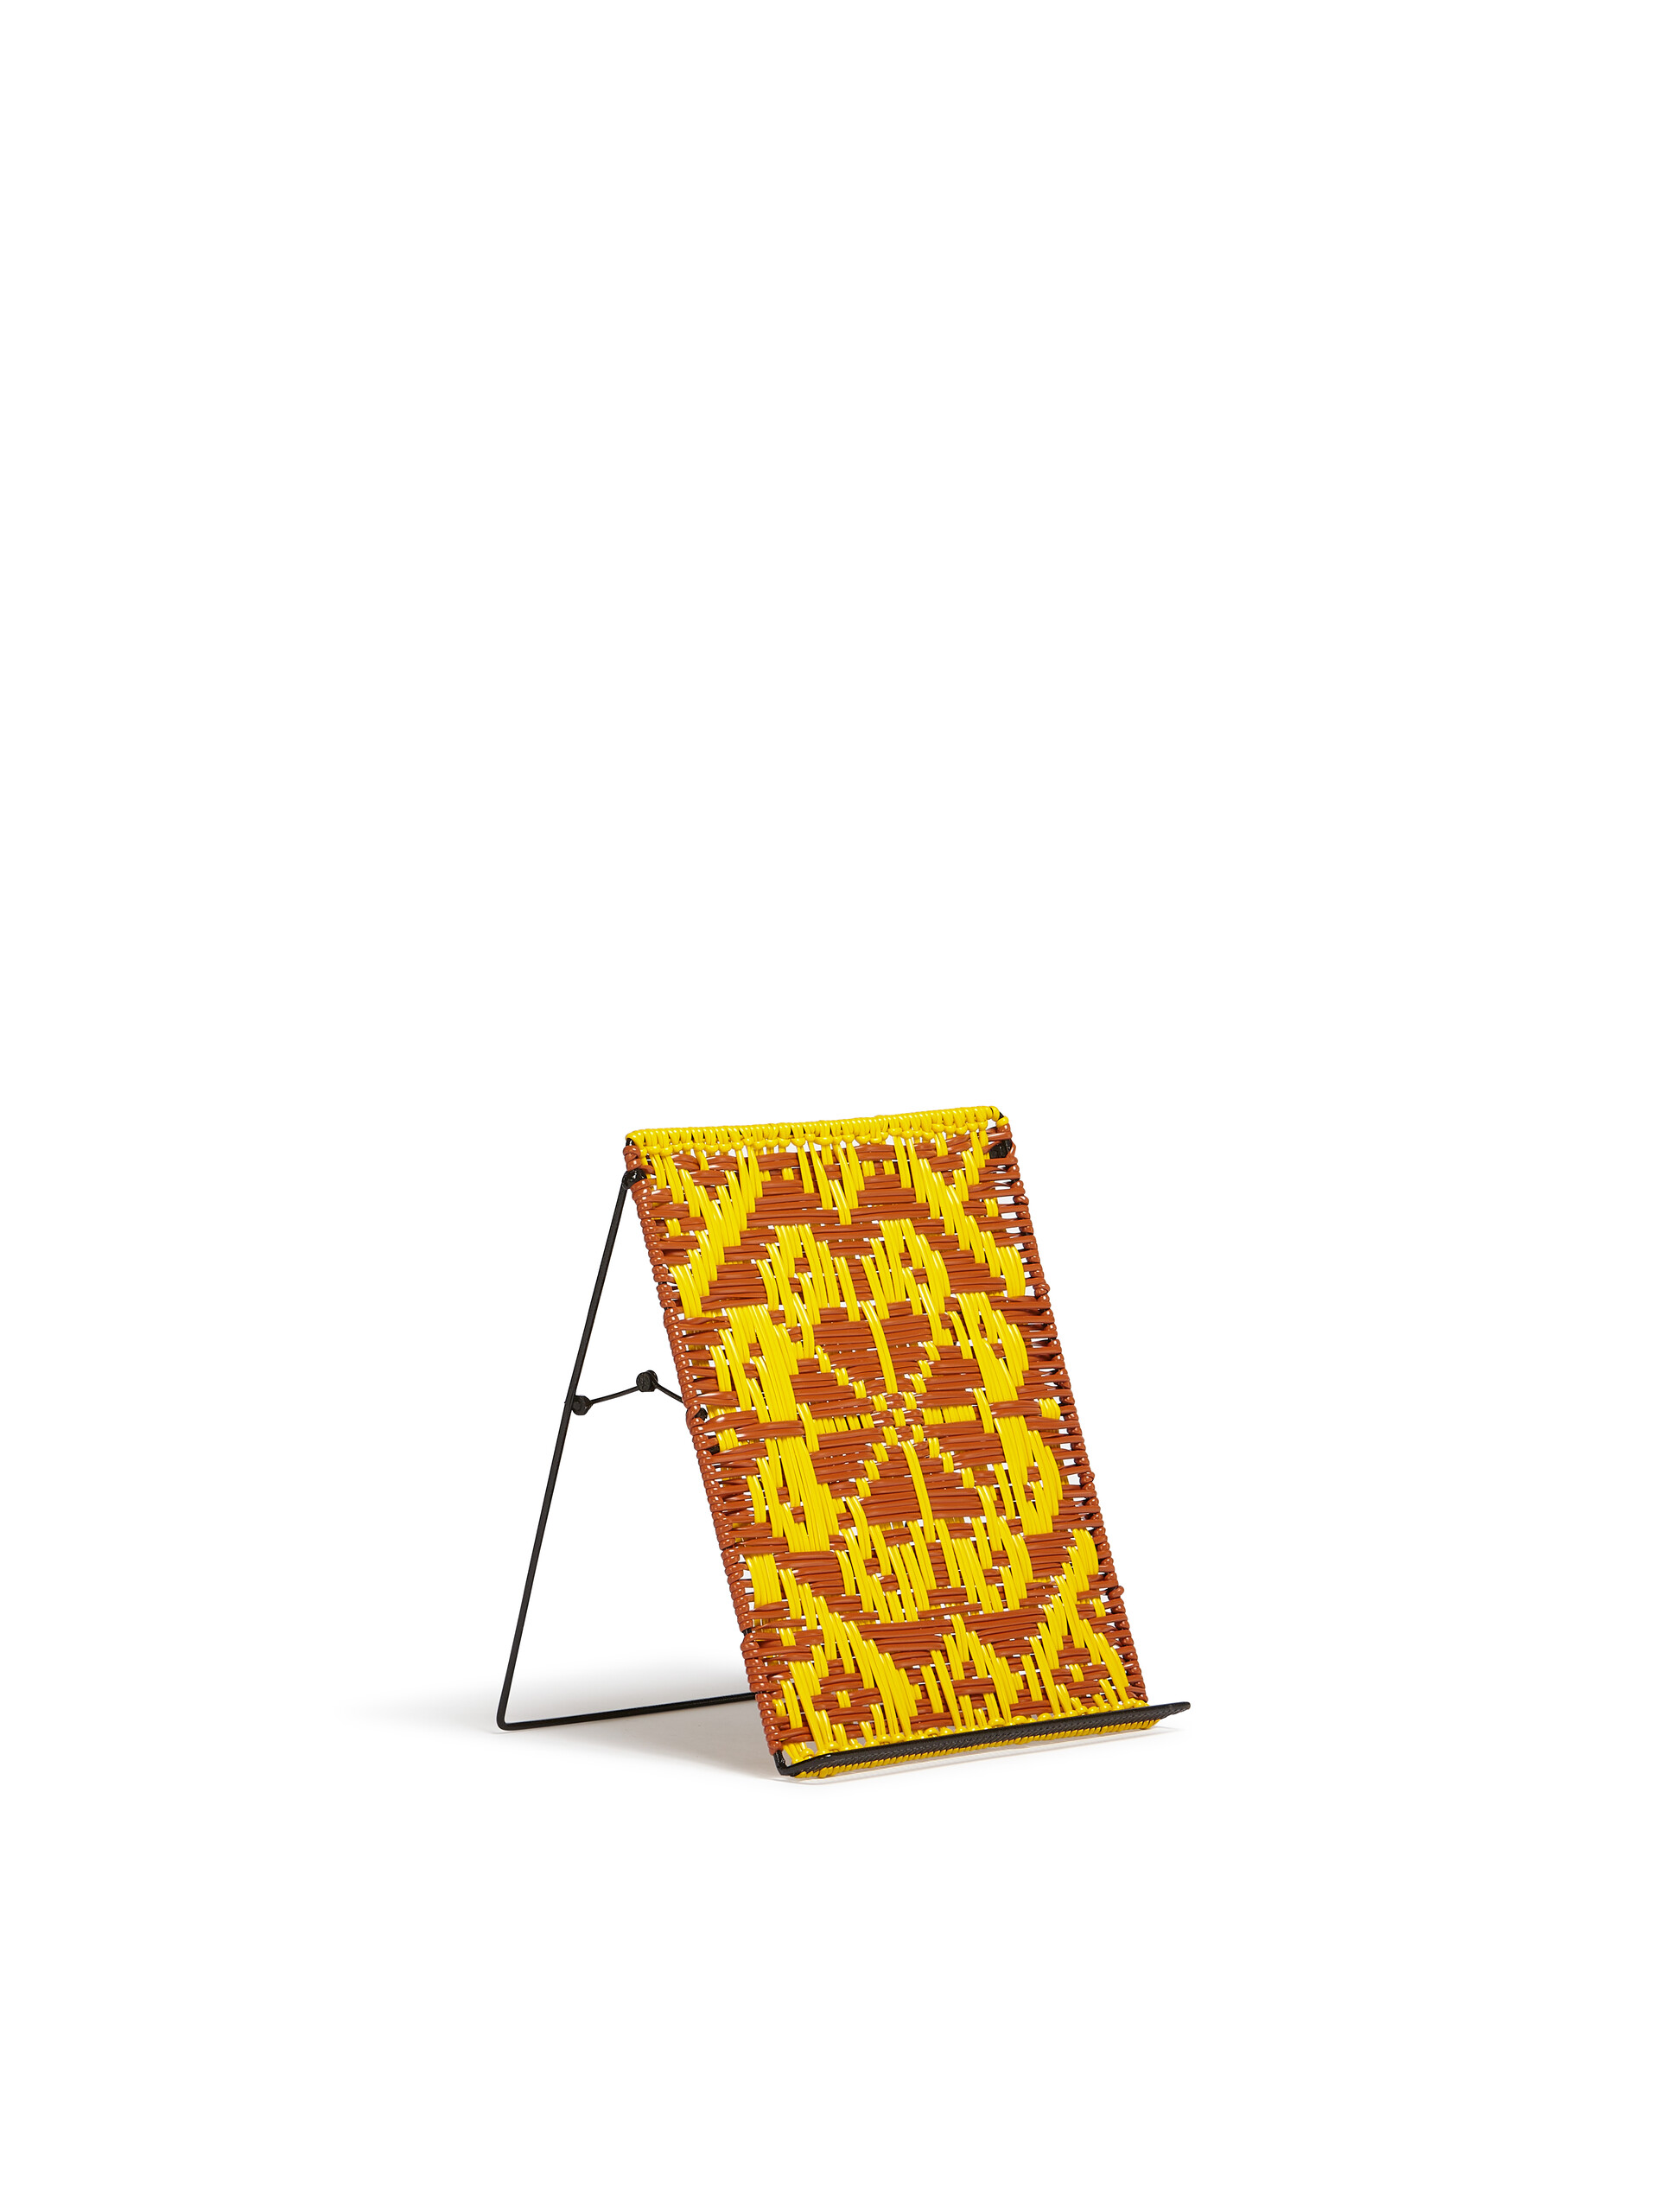 MARNI MARKET yellow and red woven iPad stand - Furniture - Image 2